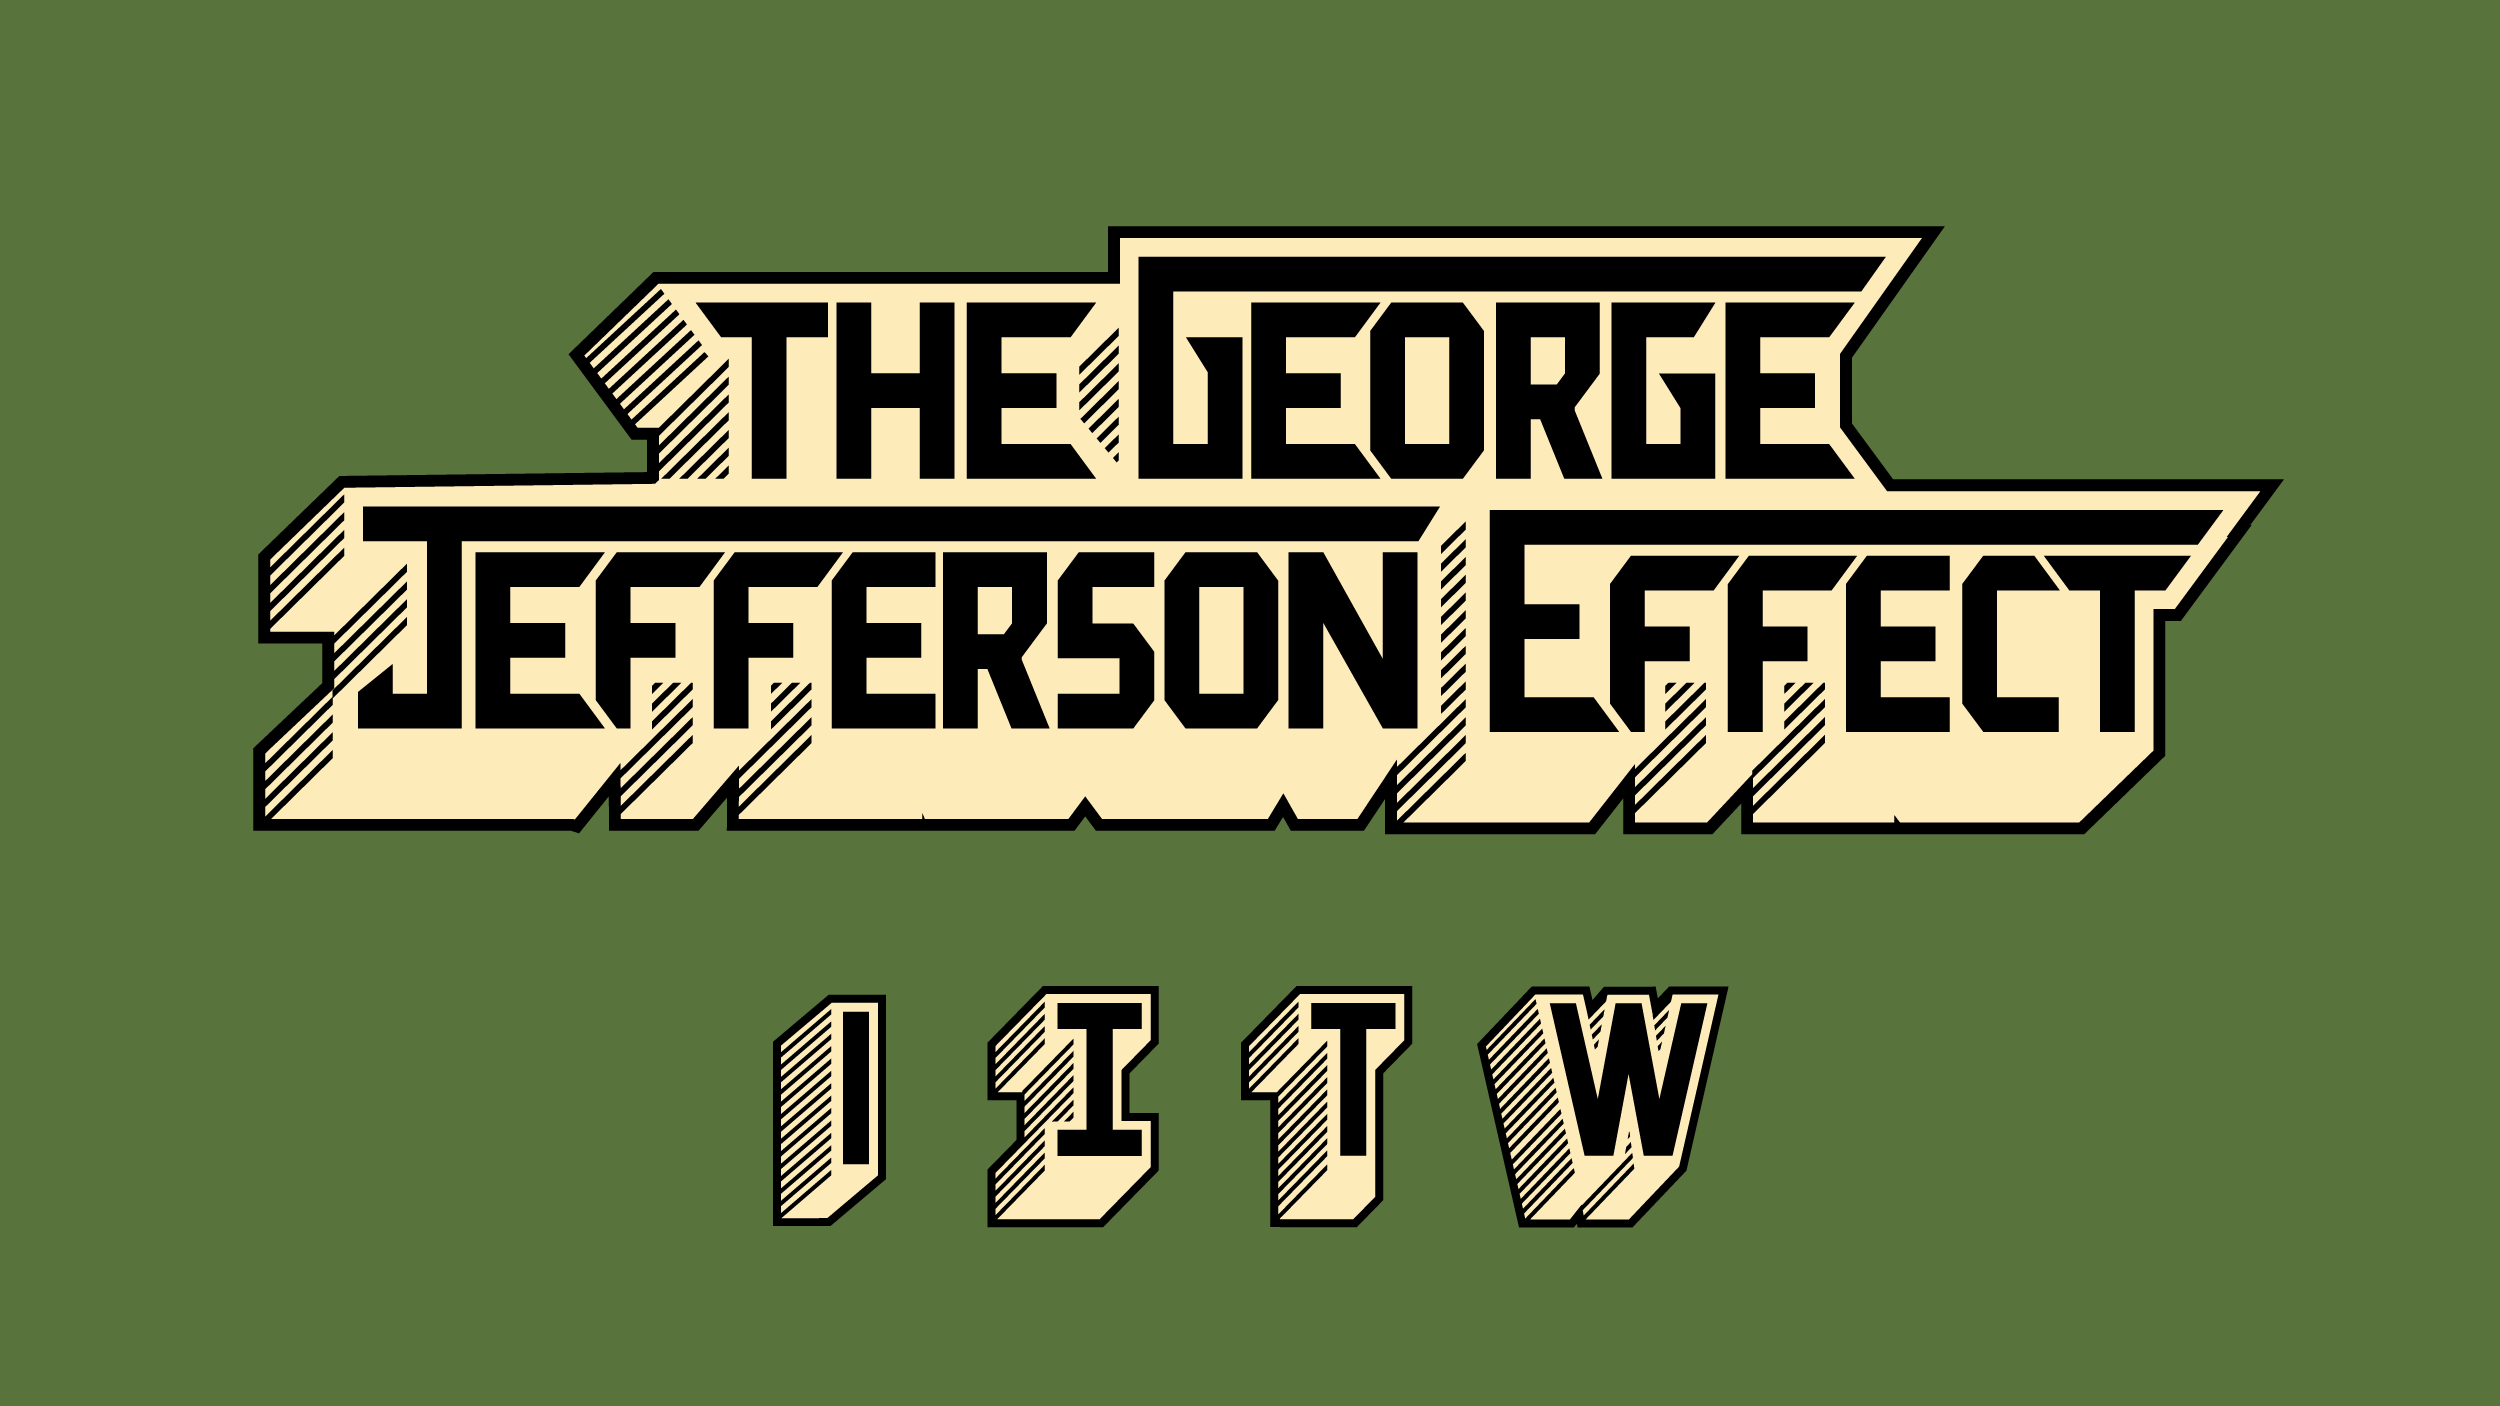 George Jefferson Effect - custom lettering by Hoodzpah for AirBNB Magazine